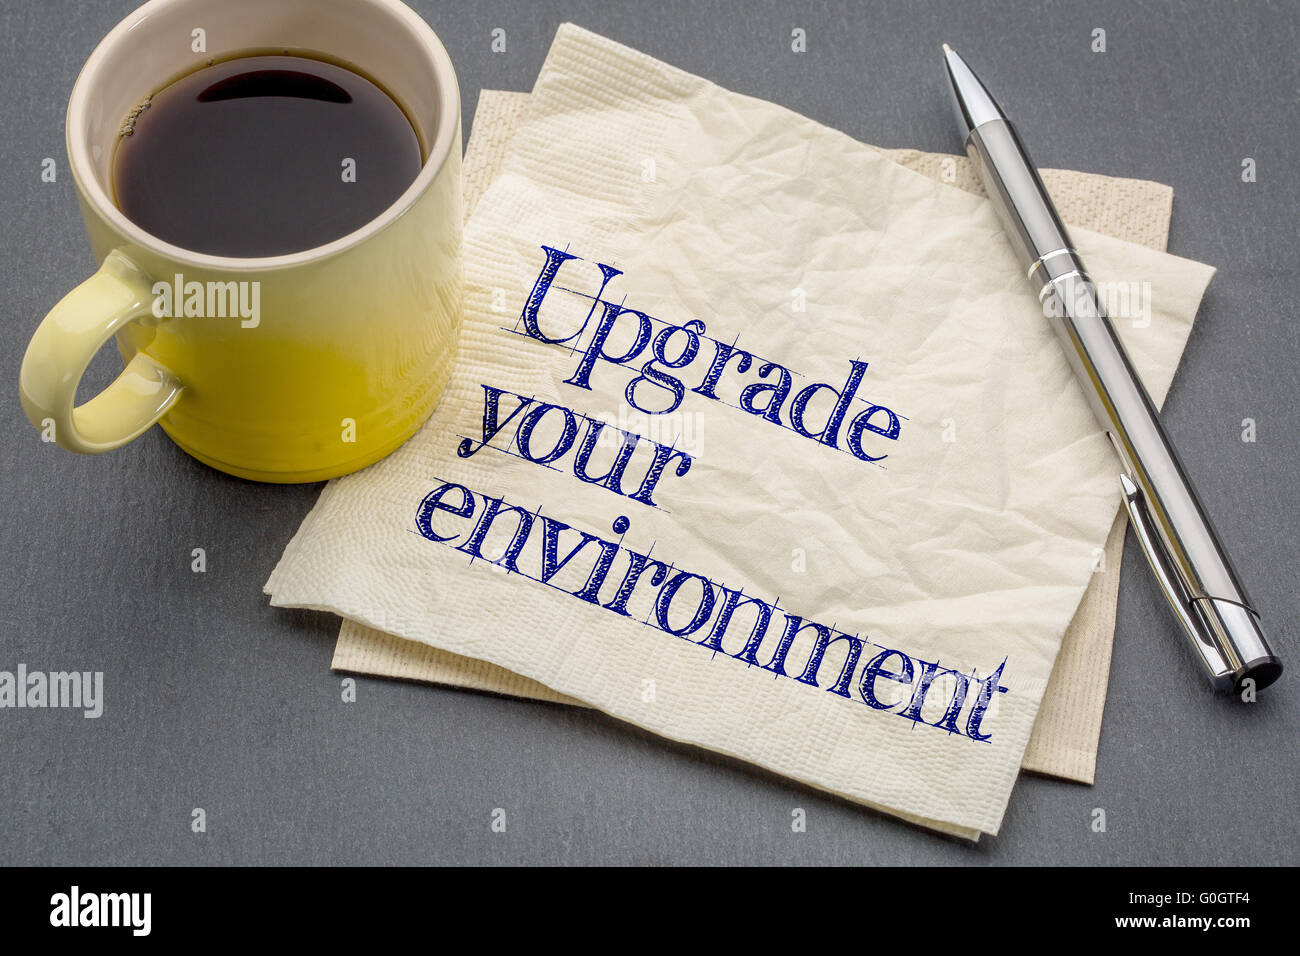 upgrade your environment - handwriting on a napkin with cup of coffee against gray slate stone background Stock Photo